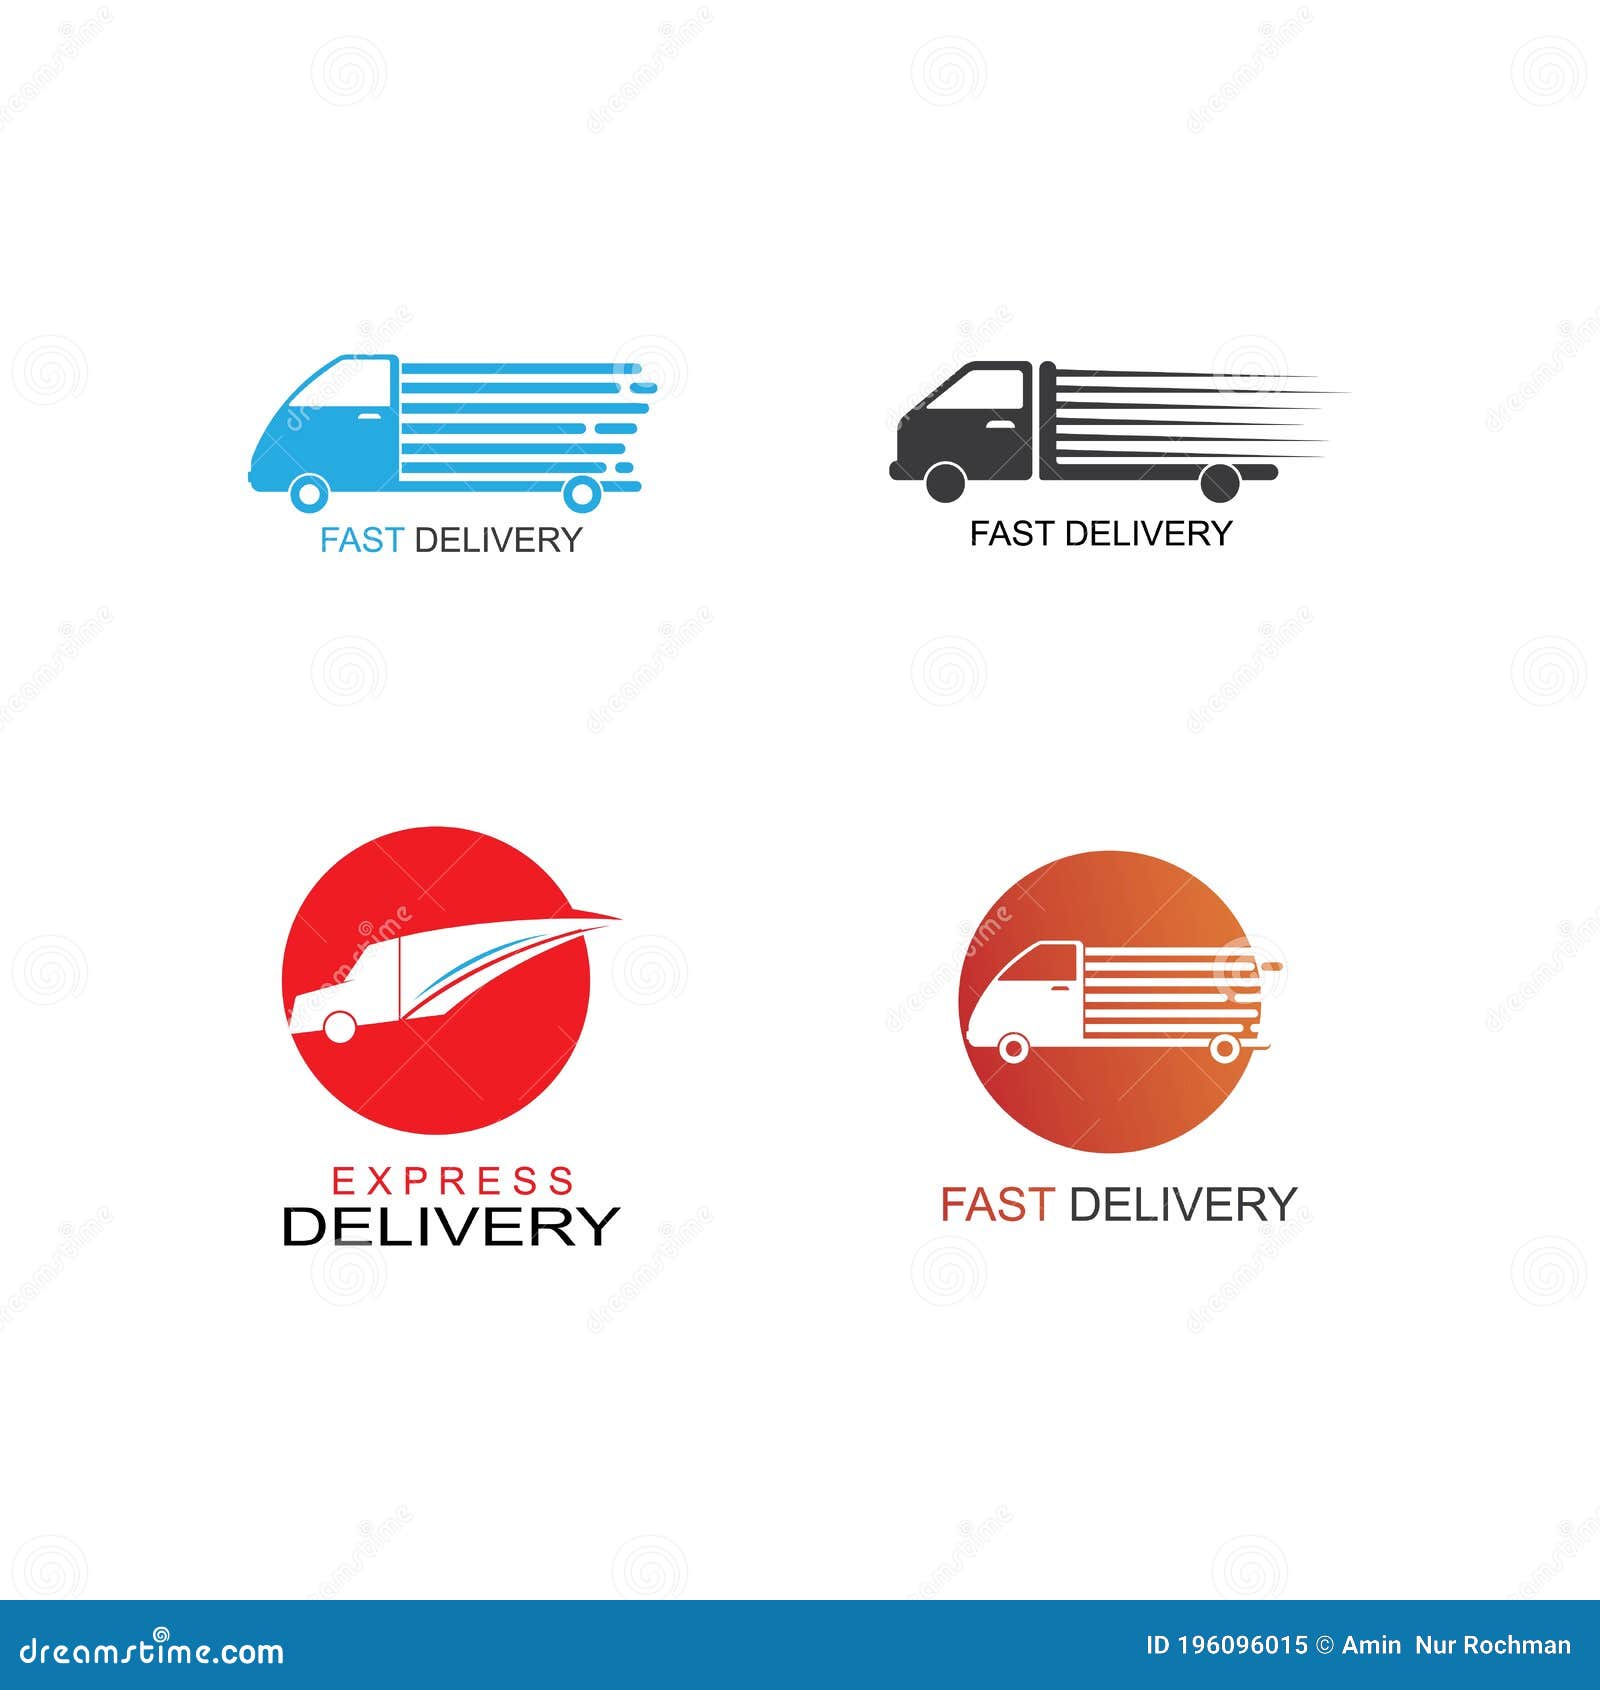 Delivery truck icon vector stock illustration. Illustration of company ...